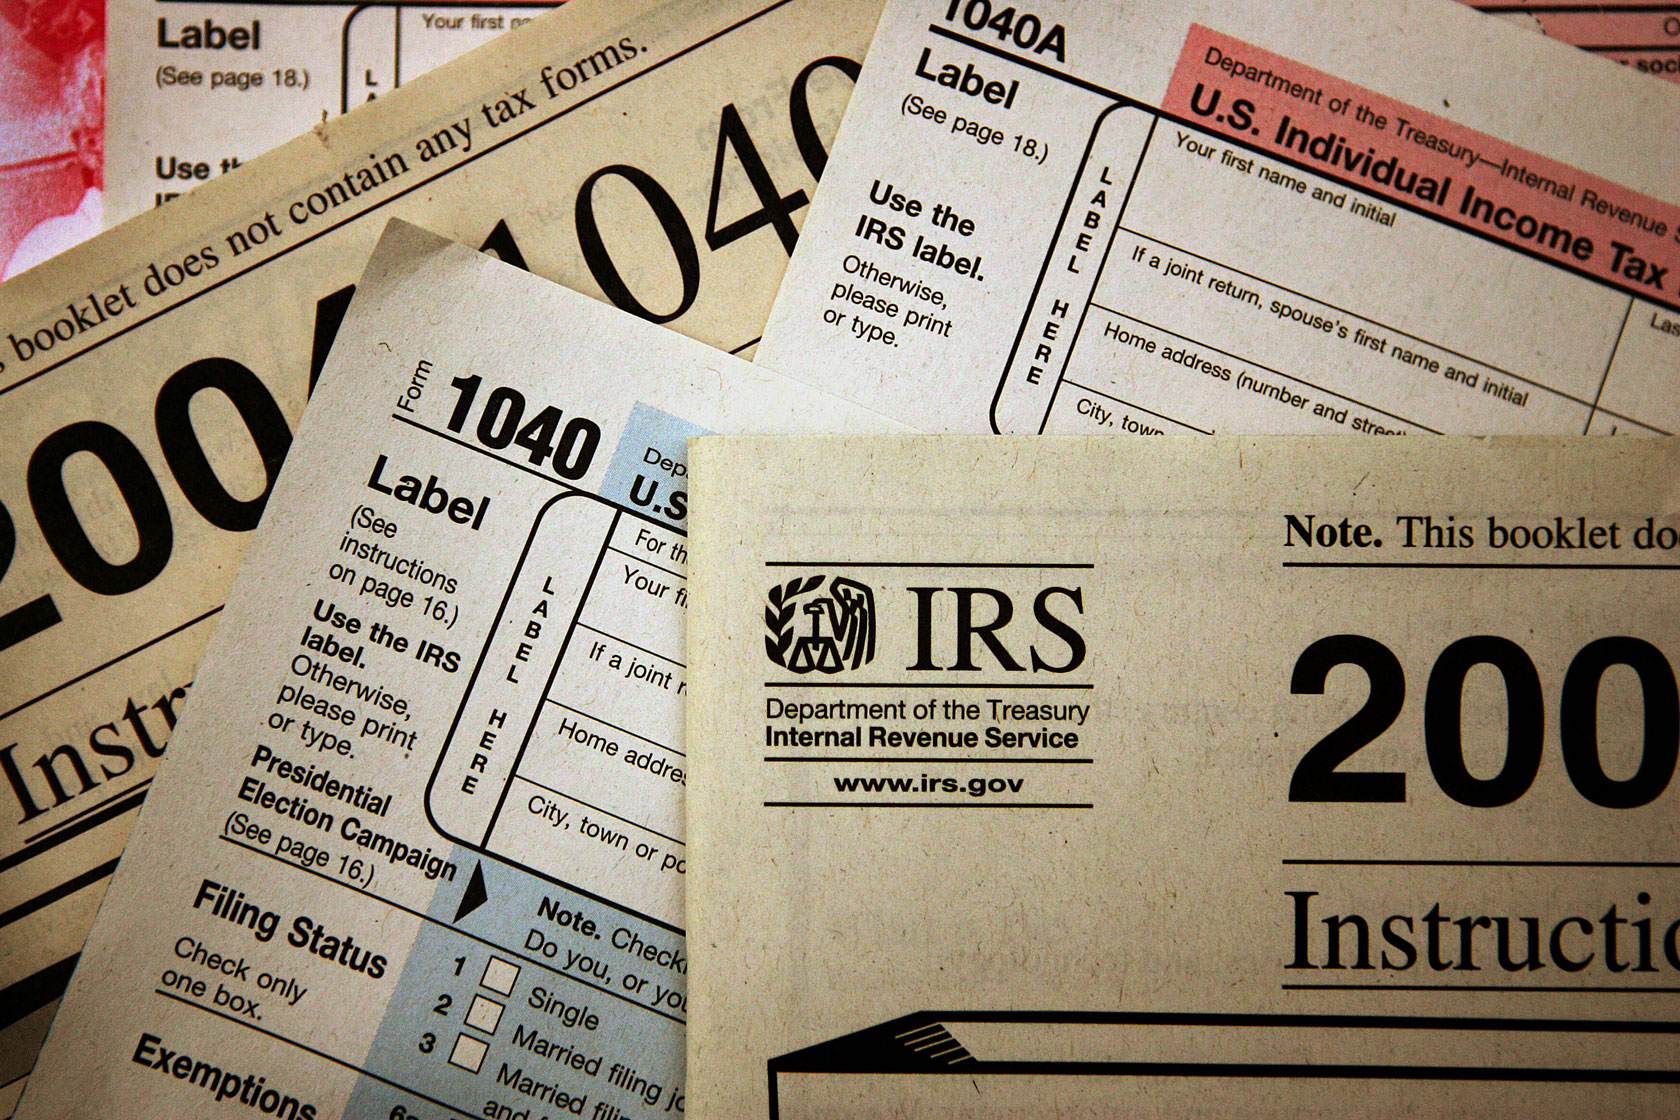 Federal tax forms are distributed at the IRS office.